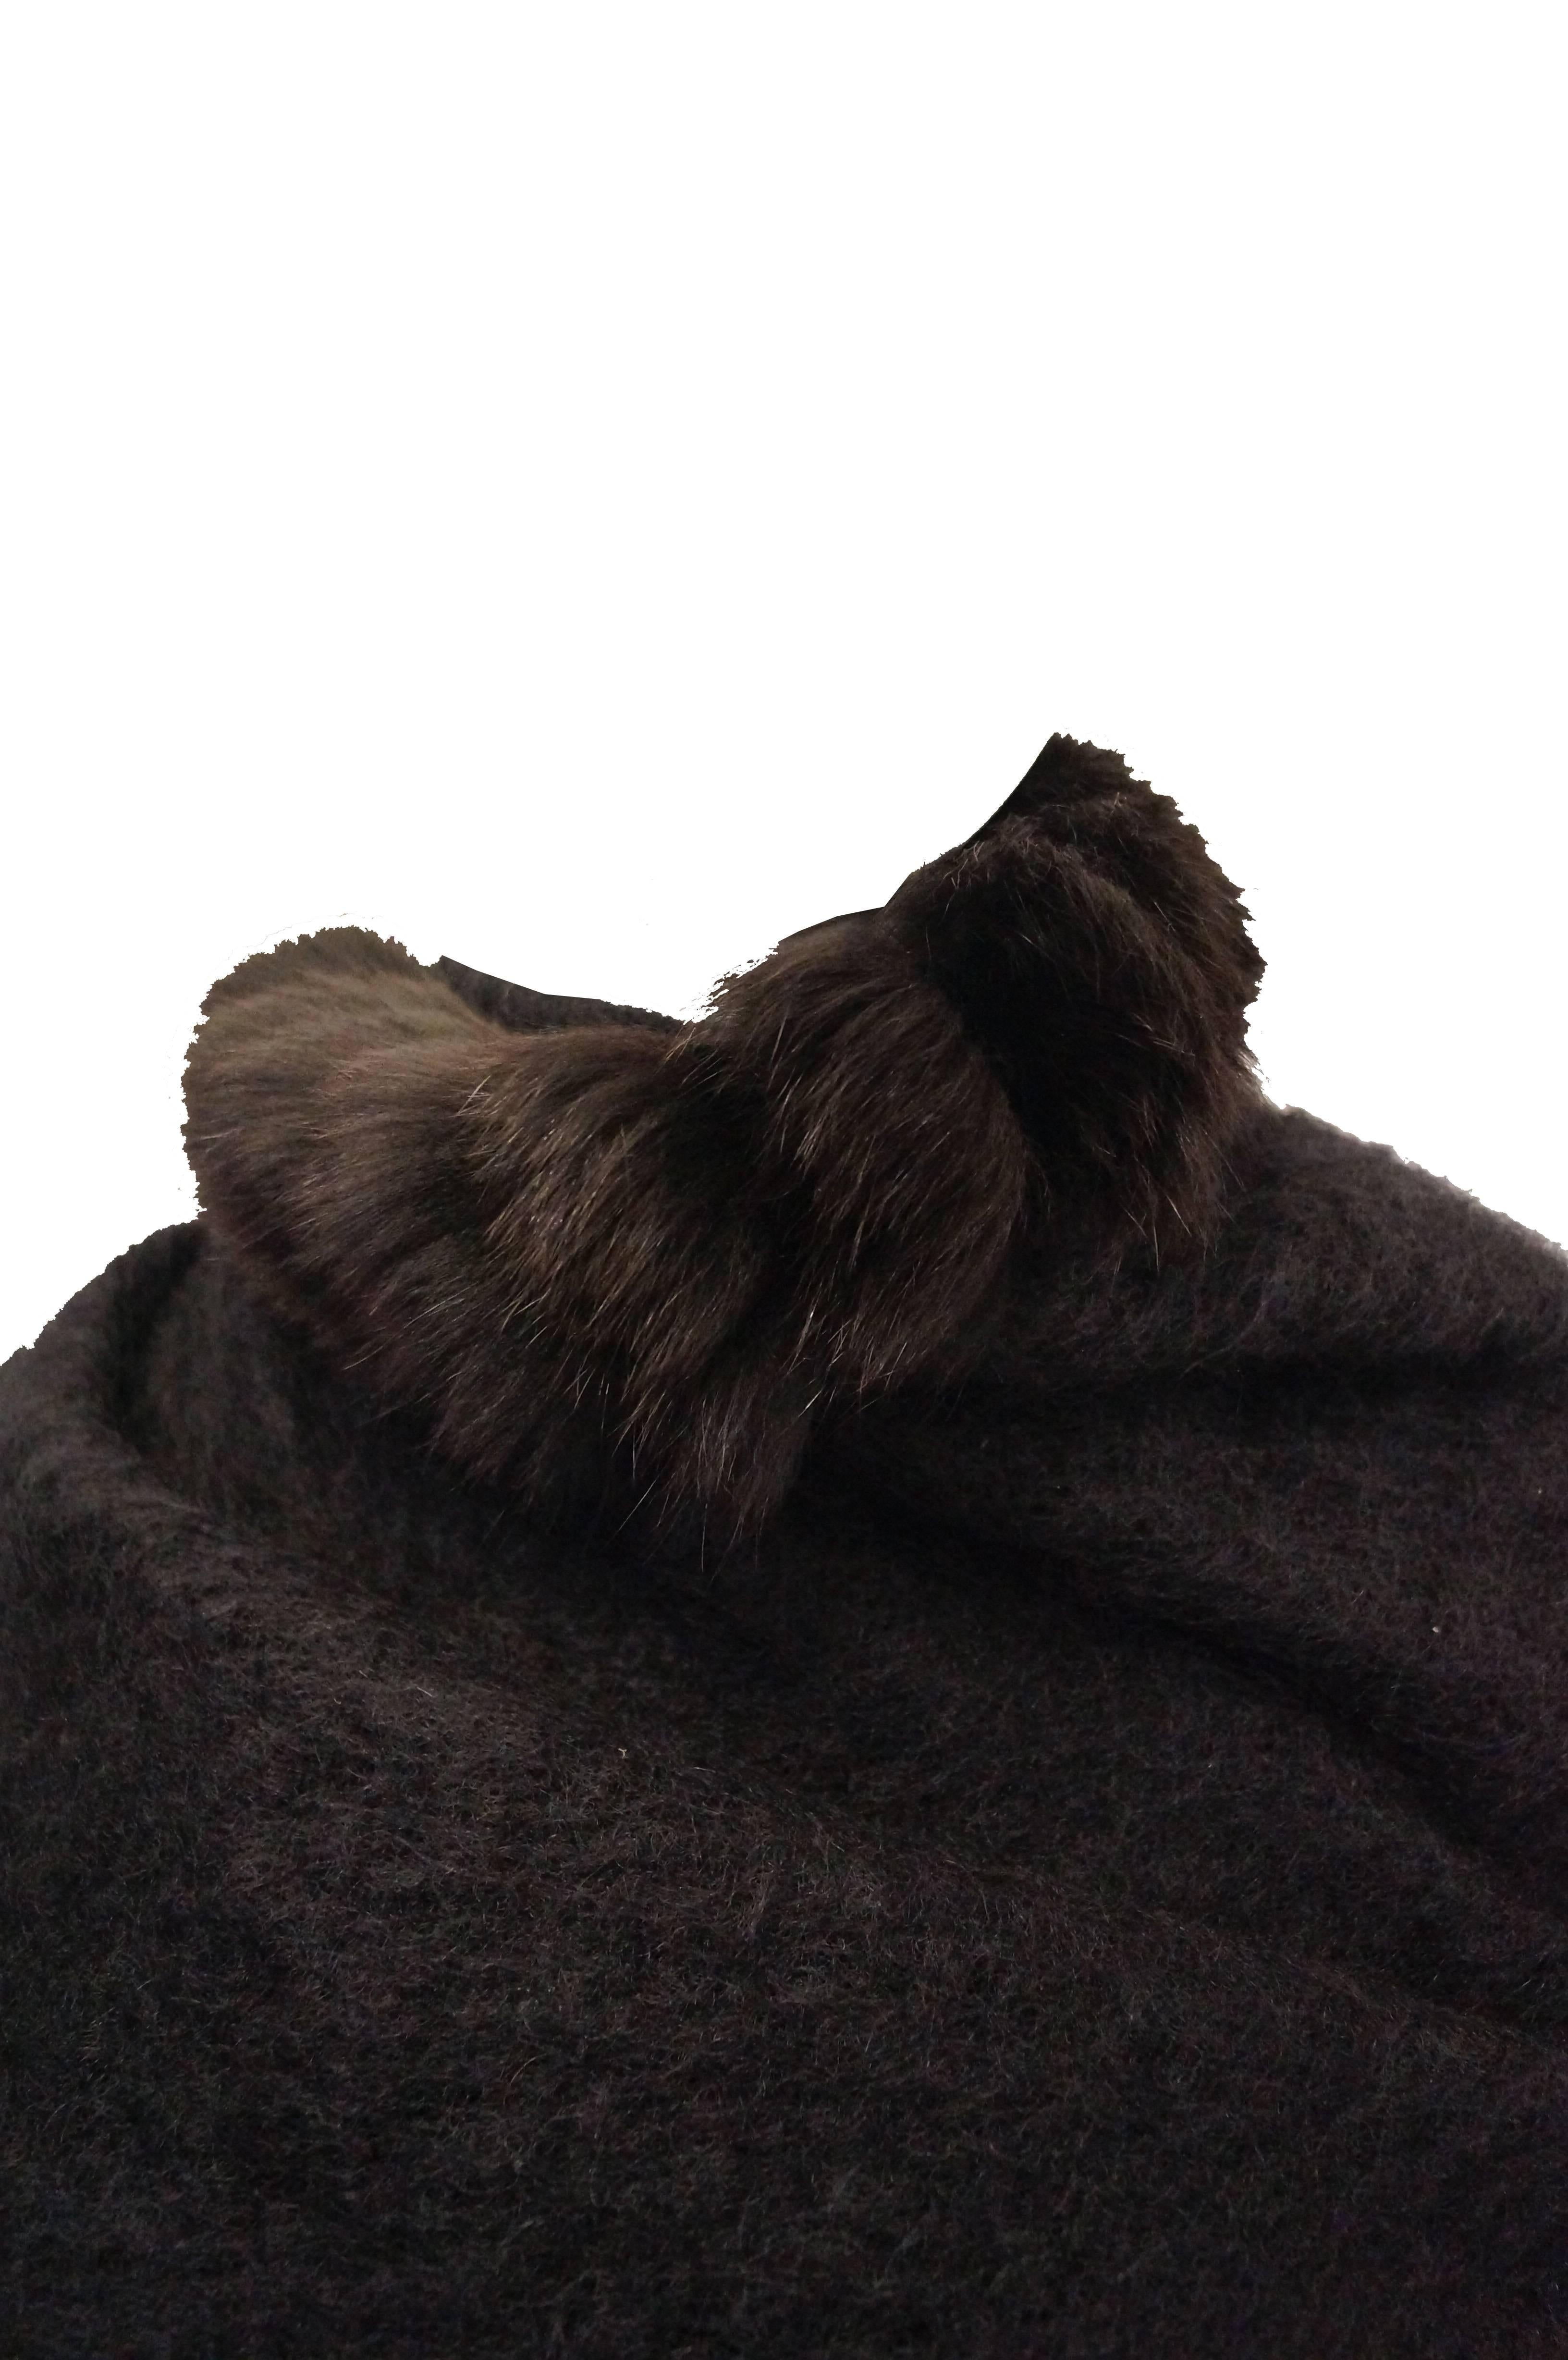 This shawl by Yves Saint Laurent is made of a plush loose knit wool and features long tufts of espresso brown fox fur edging as well as glossy button details. The triangular shawl is large enough to fully wrap around the shoulders and neck, and can